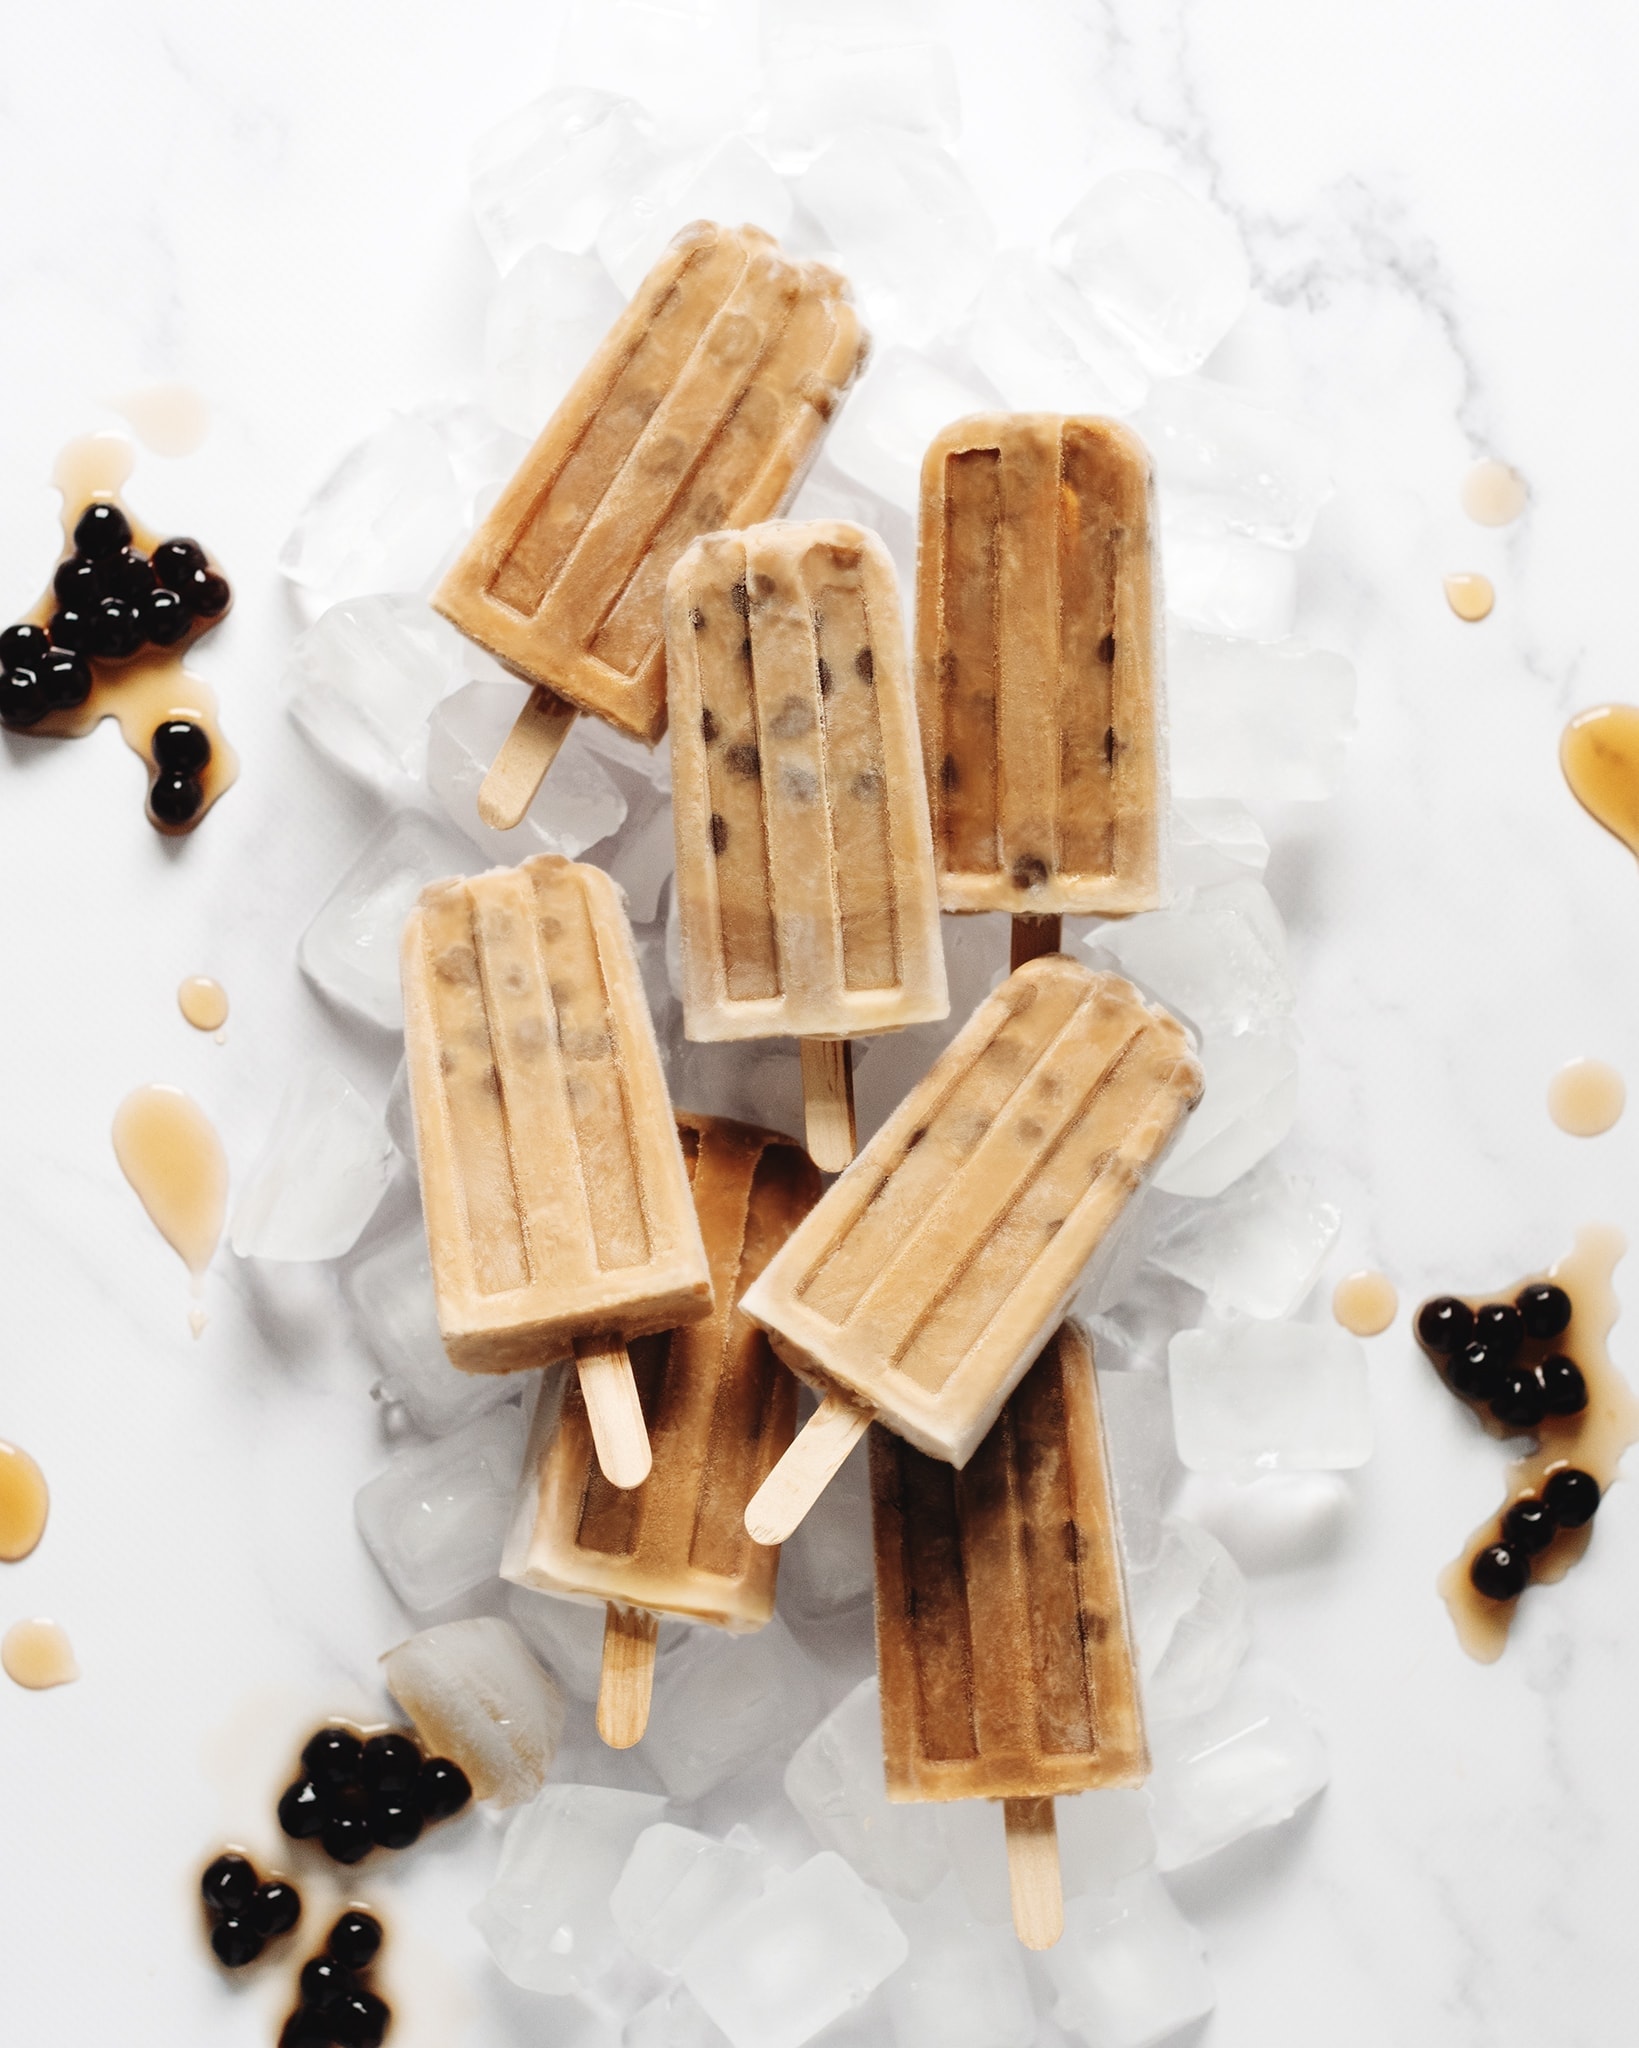 Several boba milk tea popsicles on top of ice cubes